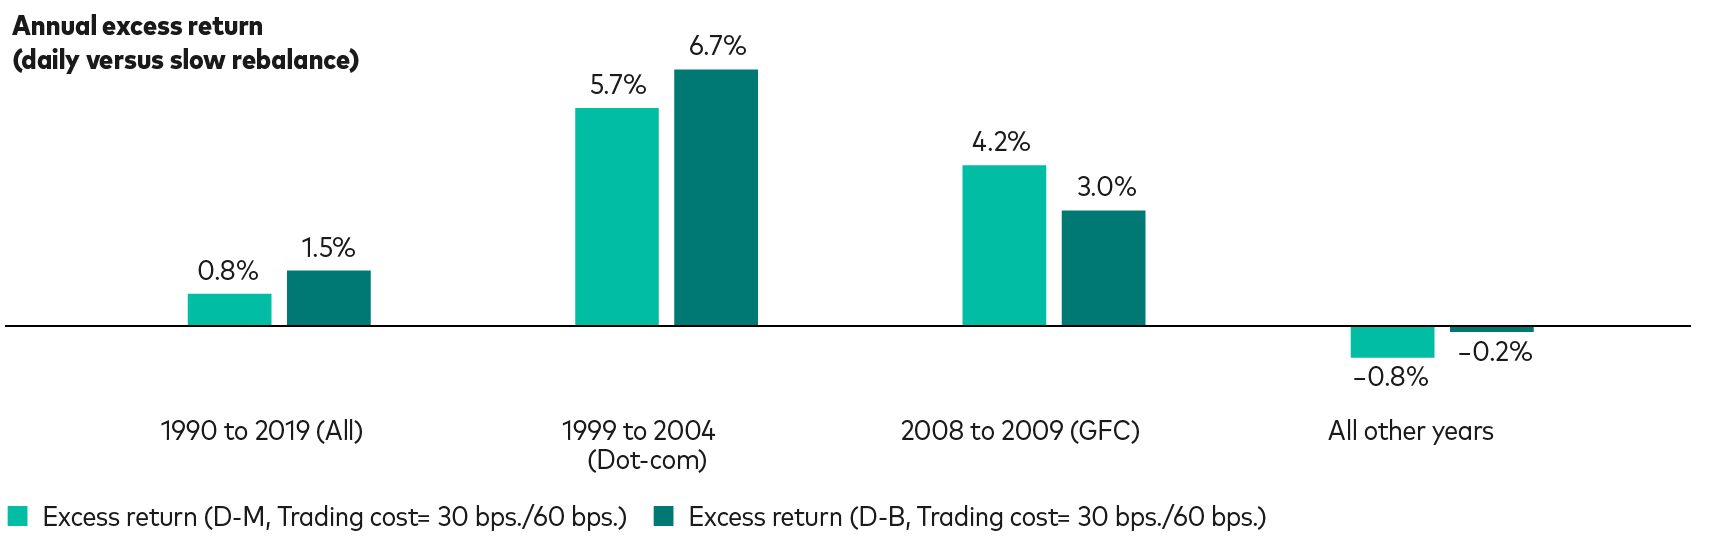 This bar chart for the quality factor includes four time periods; January 1990 to August 2019, period covering the dot-com bubble, the GFC, and all other years that exclude the GFC and dot-com bubble. For the full period of nearly 30 years, the excess return for daily vs. monthly rebalancing is 0.8% and the excess return for daily vs. bi-annual rebalancing is 1.5%. The Dot-Com excess return for daily vs. monthly rebalancing is 5.7% and the excess return for daily vs. bi-annual rebalancing is 6.7%. The GFC excess return for daily vs. monthly rebalancing is 4.2% and the excess return for daily vs. bi-annual rebalancing is 3.0%. The all-other-years excess return for daily vs. monthly rebalancing is negative 0.8% and the excess return for daily vs. bi-annual rebalancing is negative 0.2%.